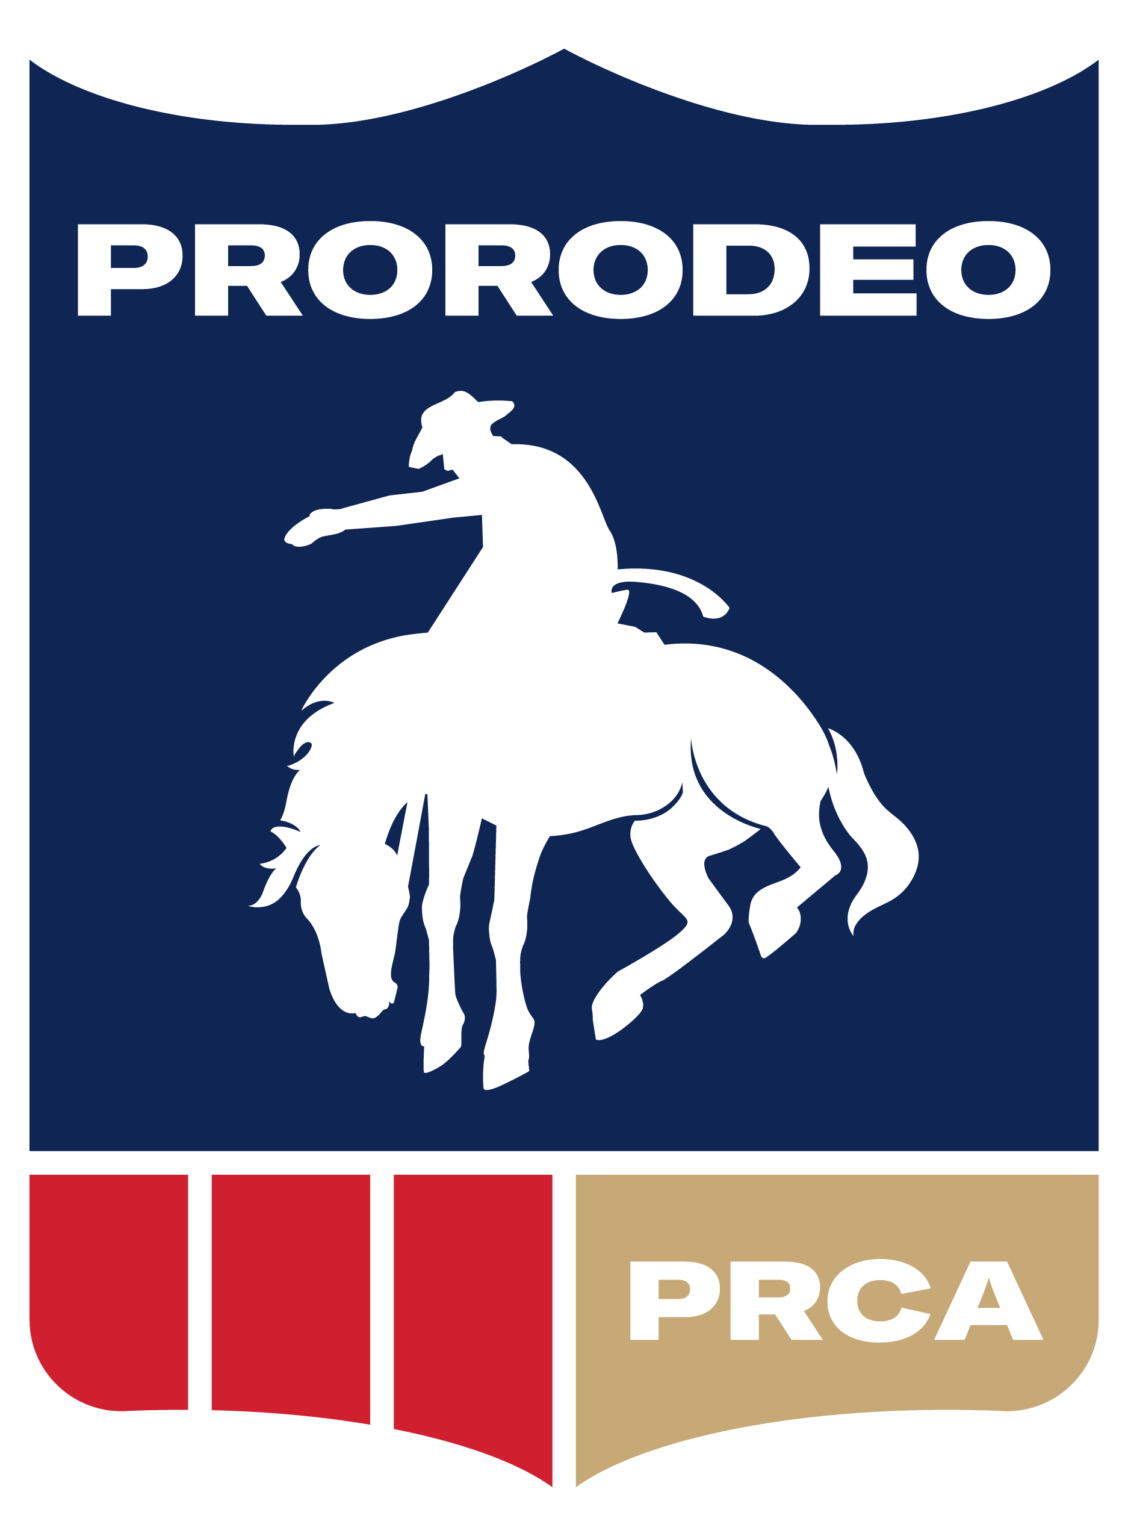 The Professional Rodeo Cowboy Association